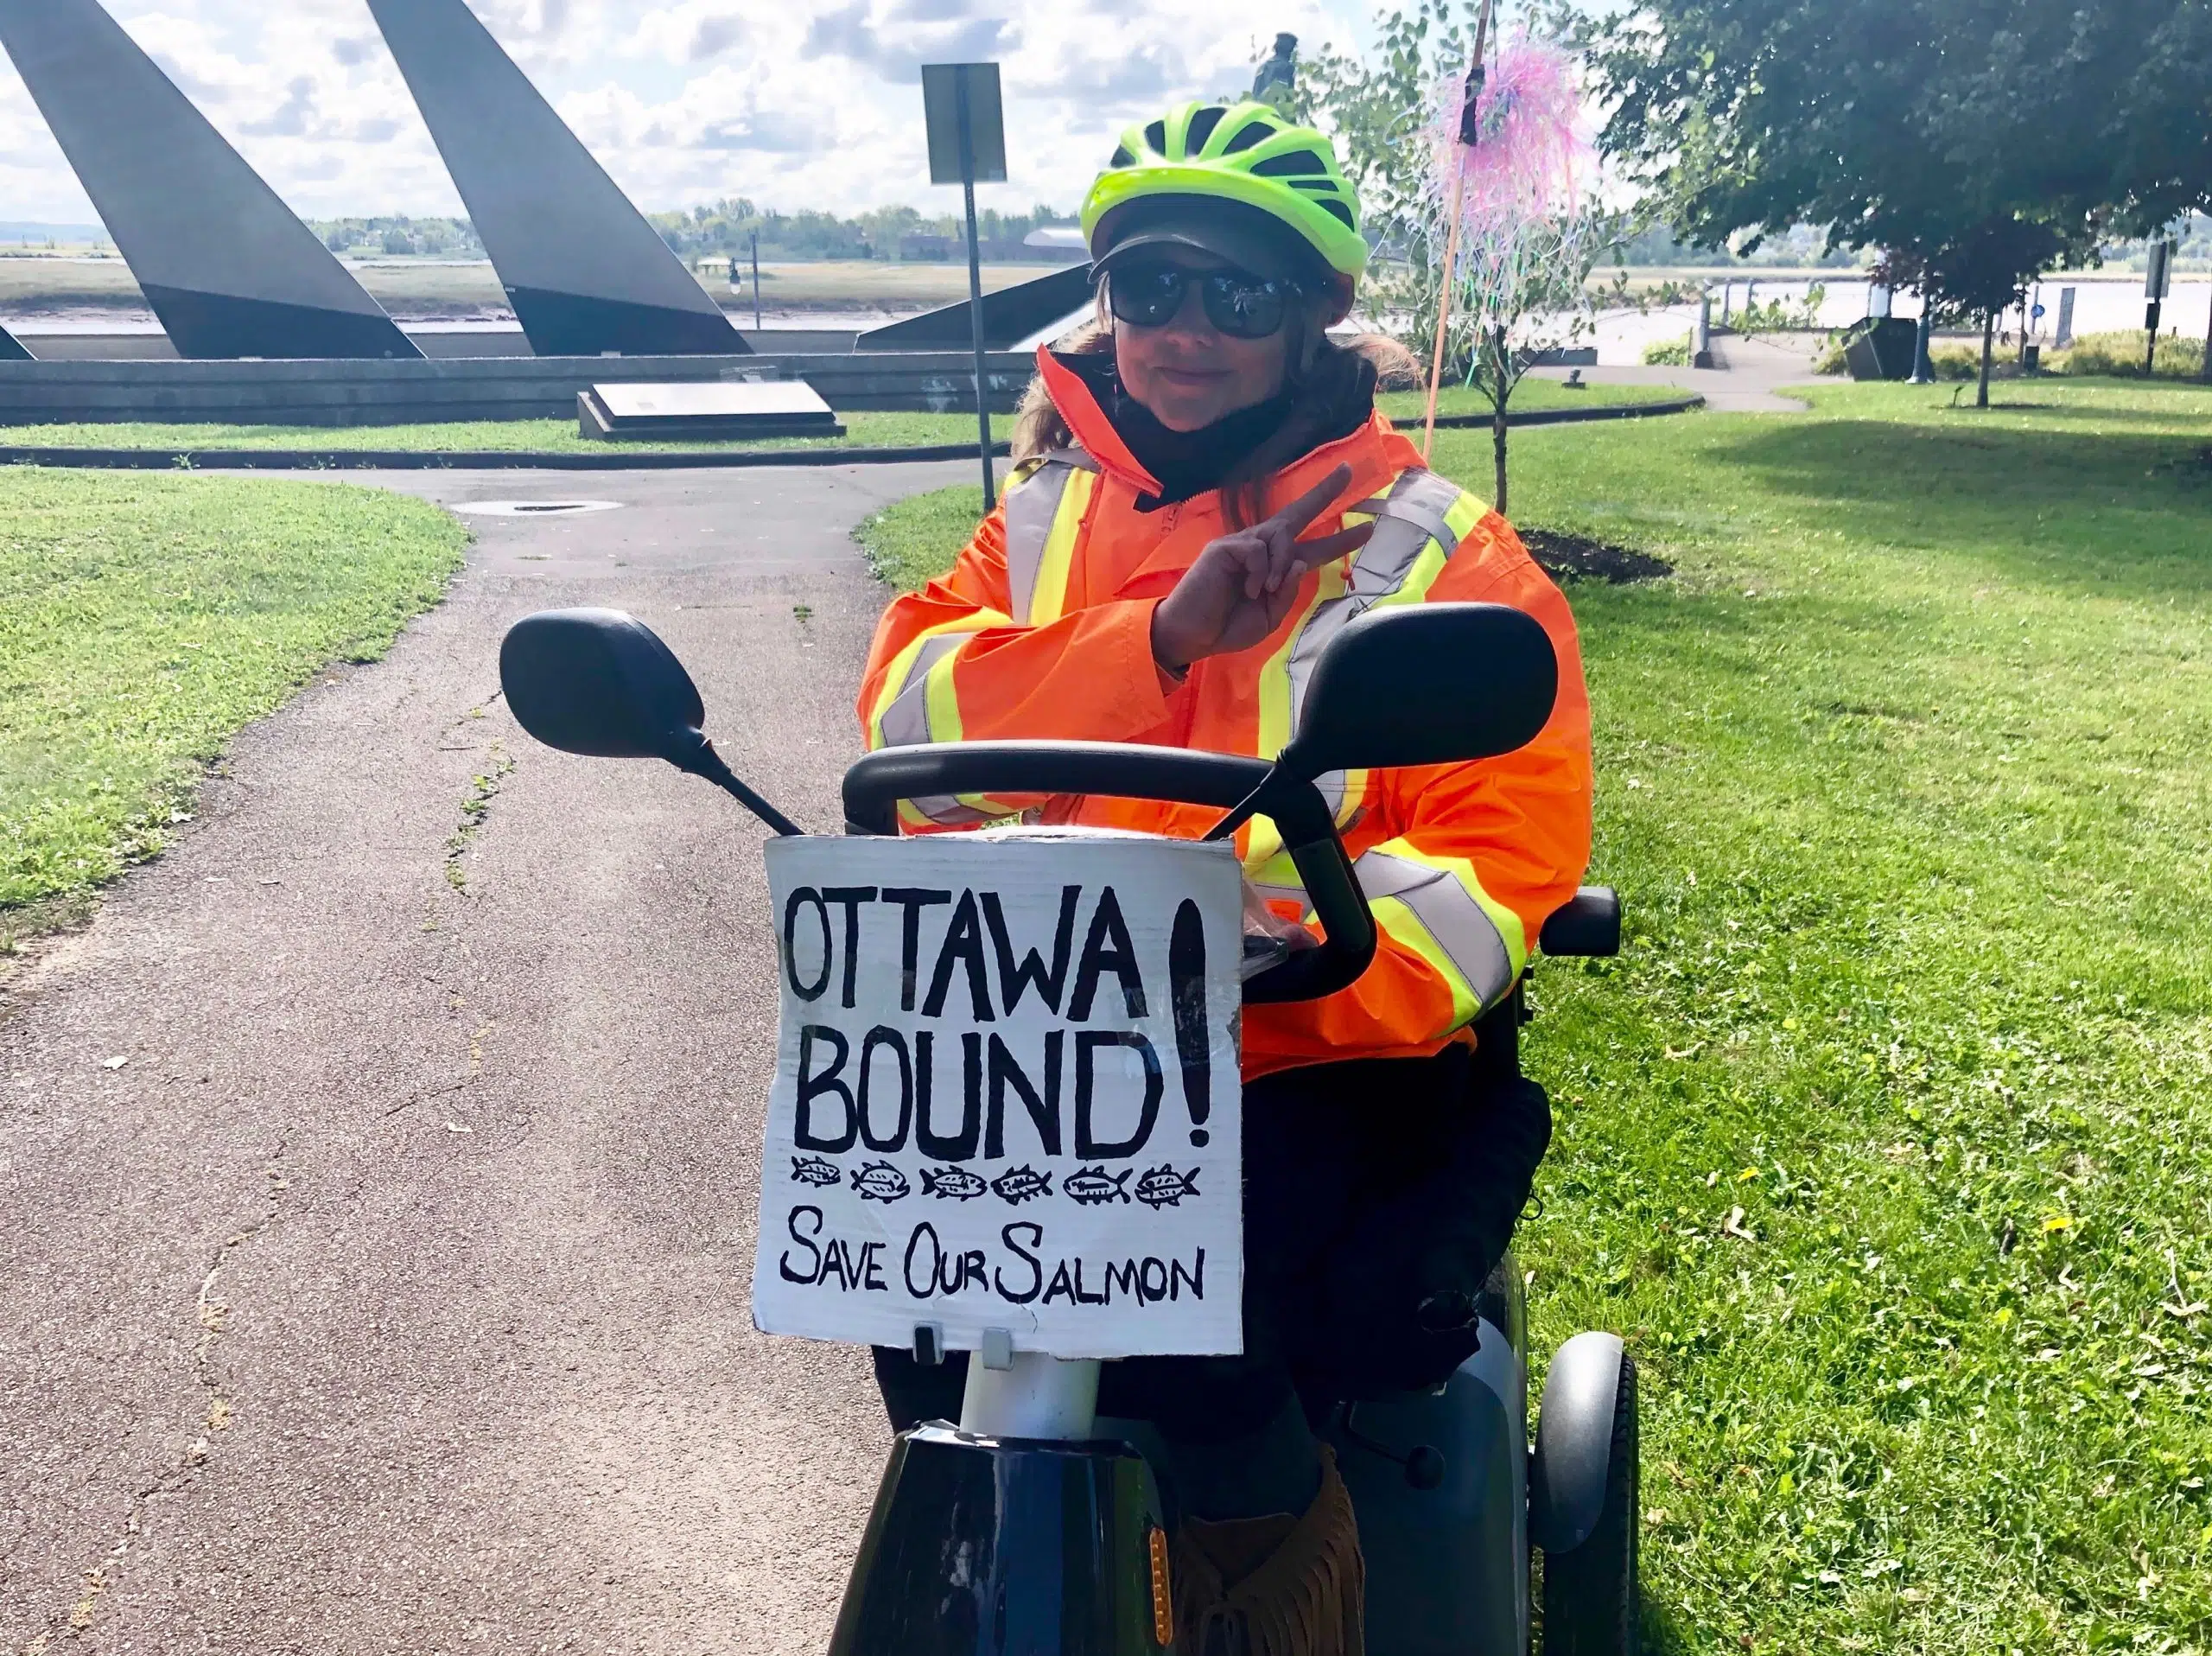 N.S. Woman Rides Scooter To Ottawa To 'Save Our Salmon'